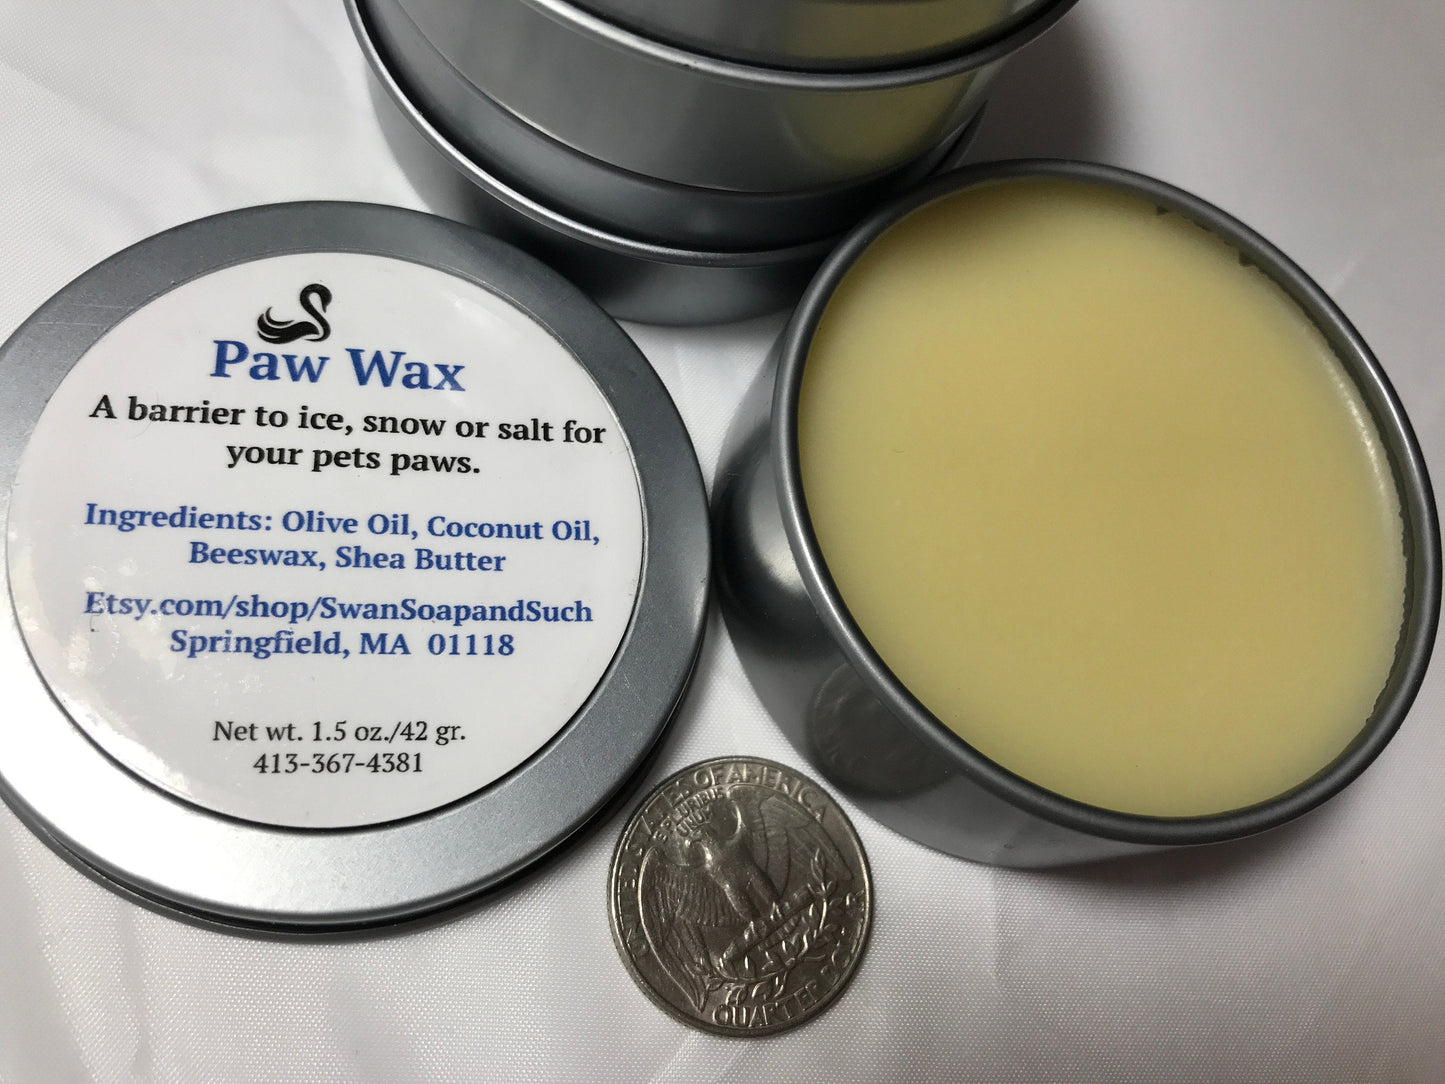 A photo showing a container of Paw Wax Paw Balm